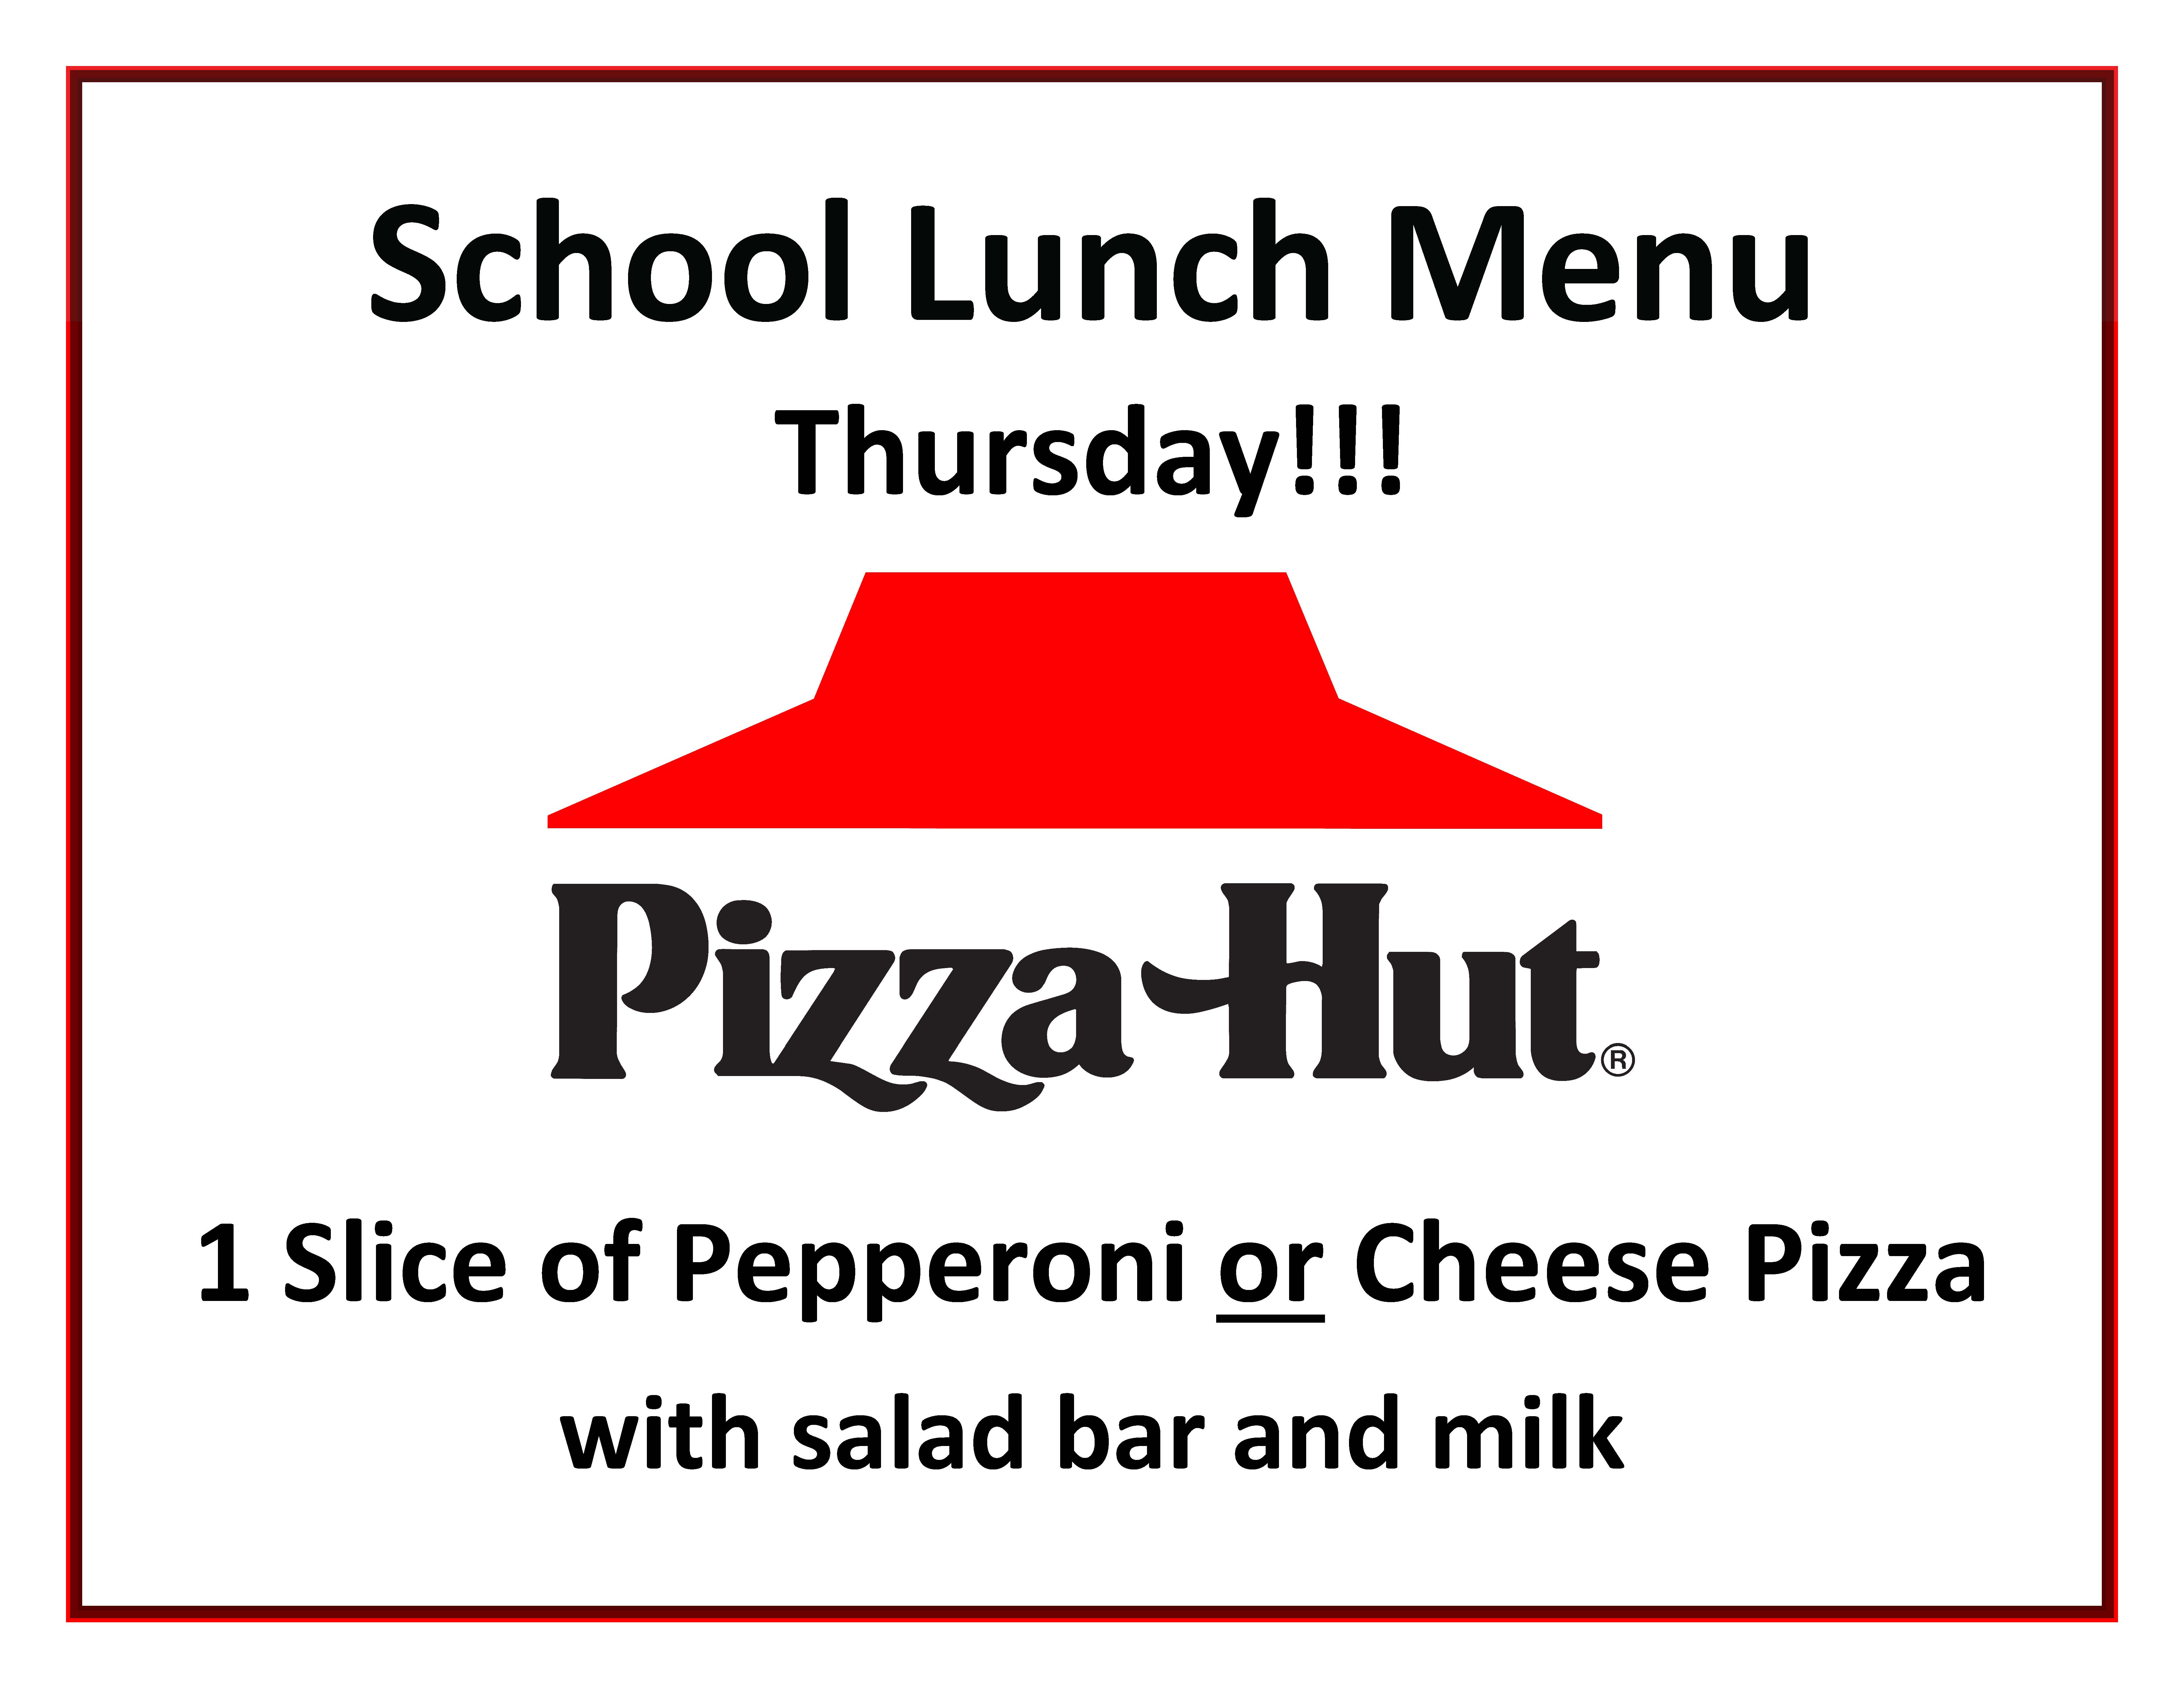 Pizza Hut Day in the school cafeteria- December 14